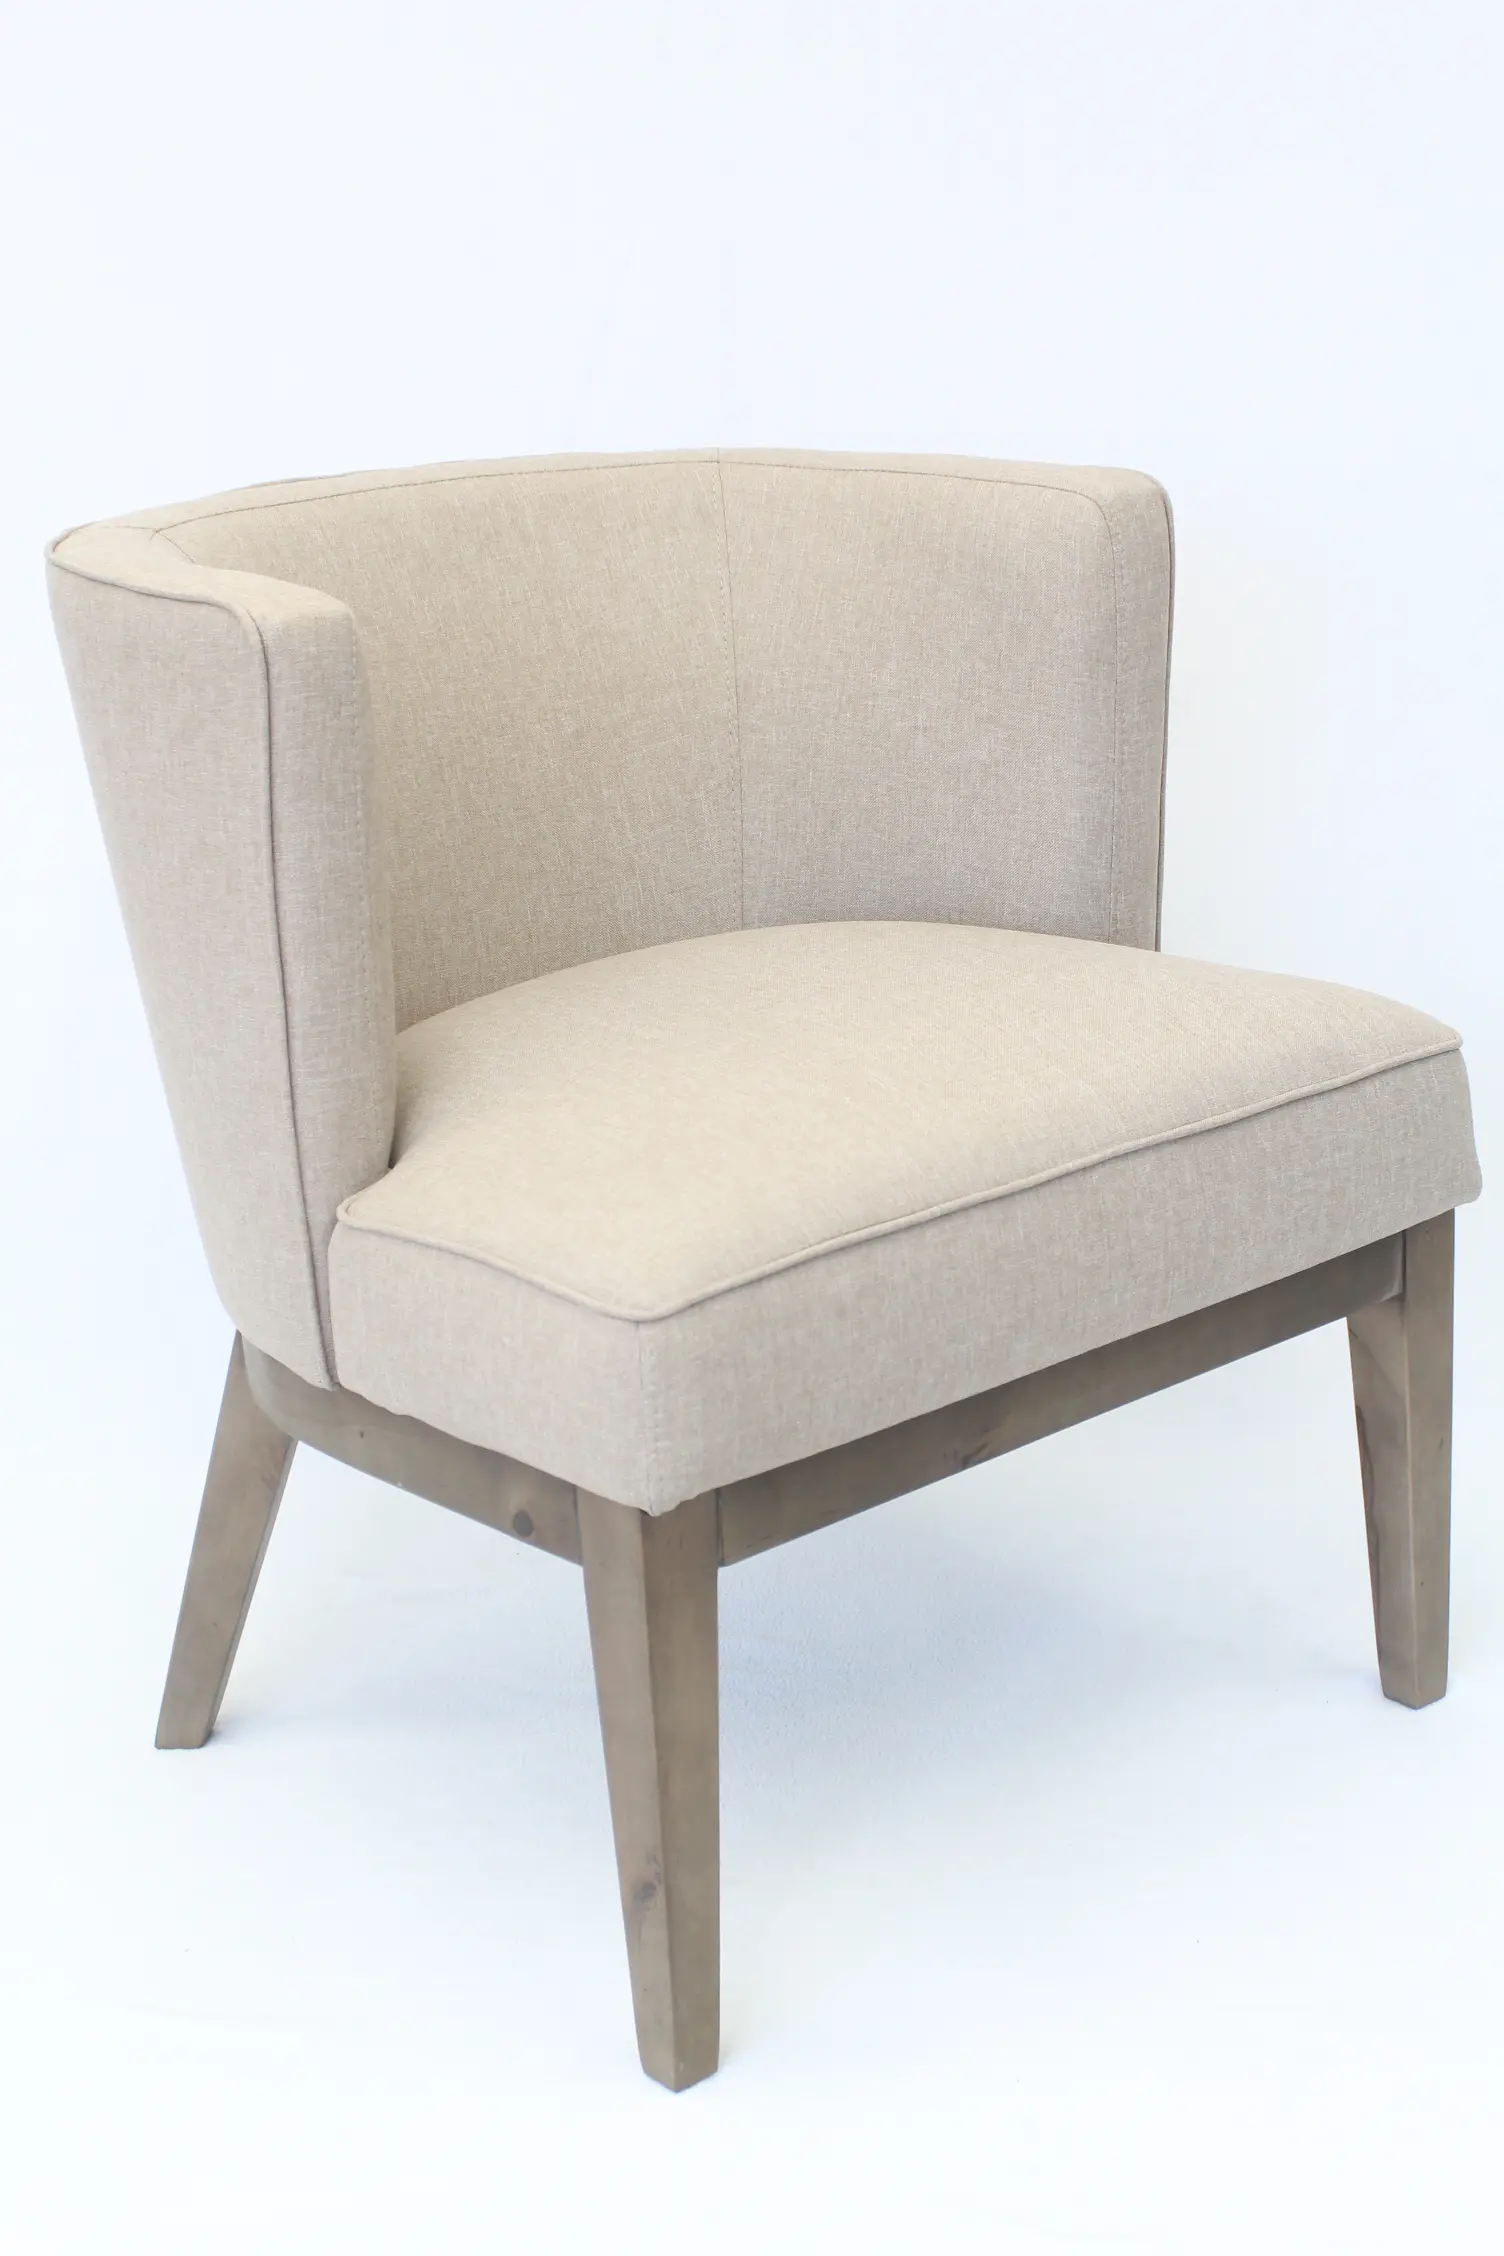 Beige Oversized Accent Chair